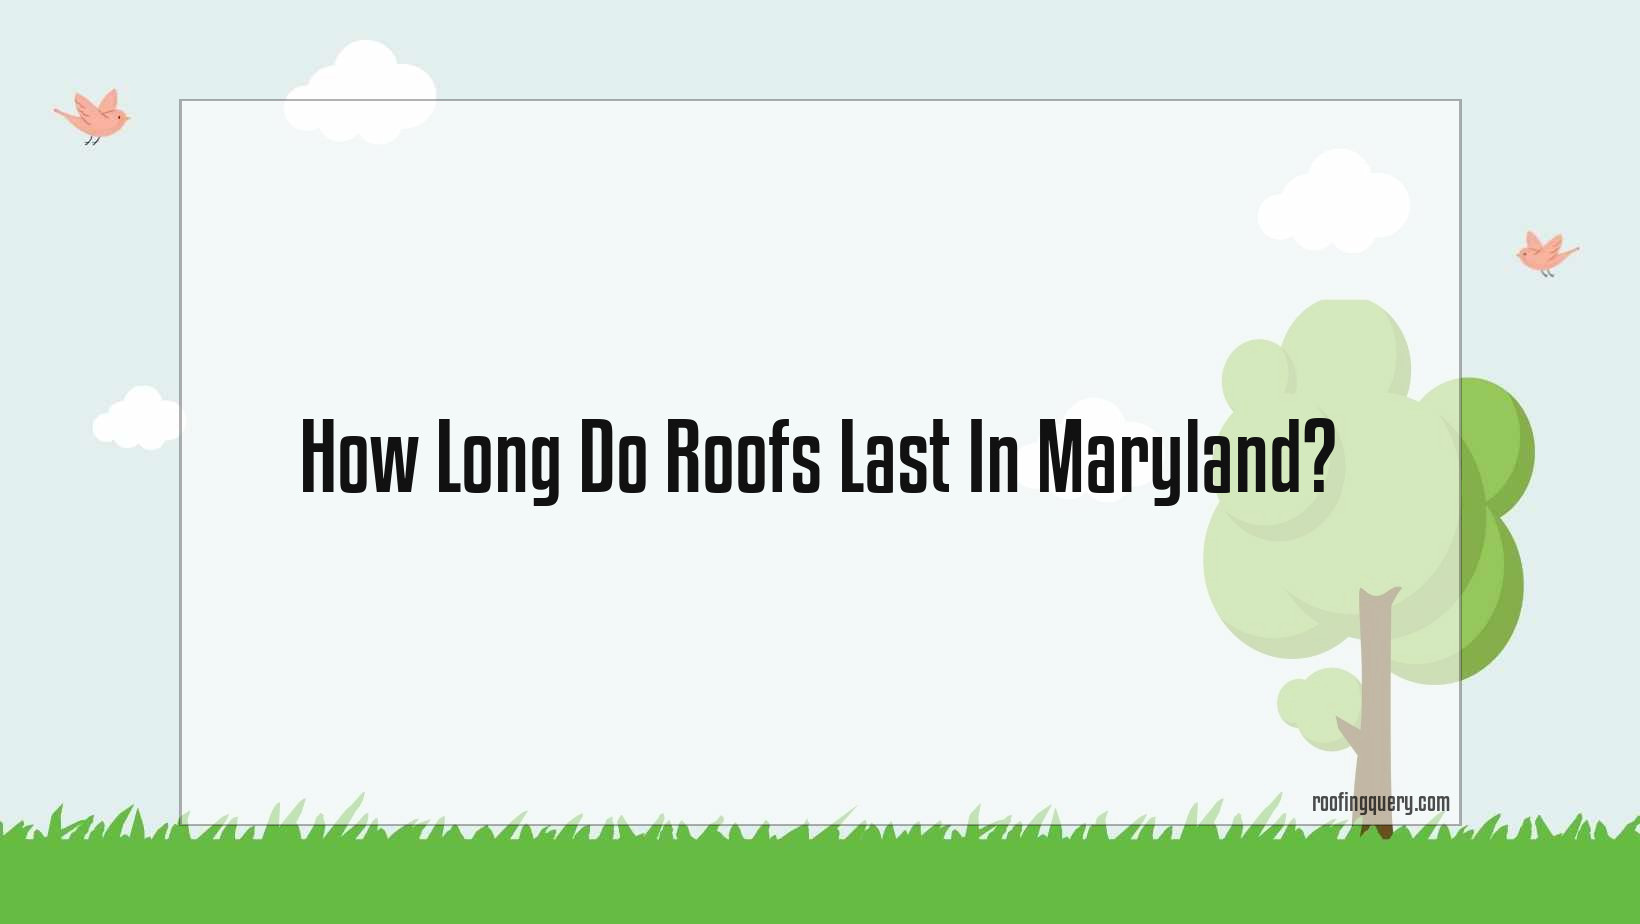 How Long Do Roofs Last In Maryland?